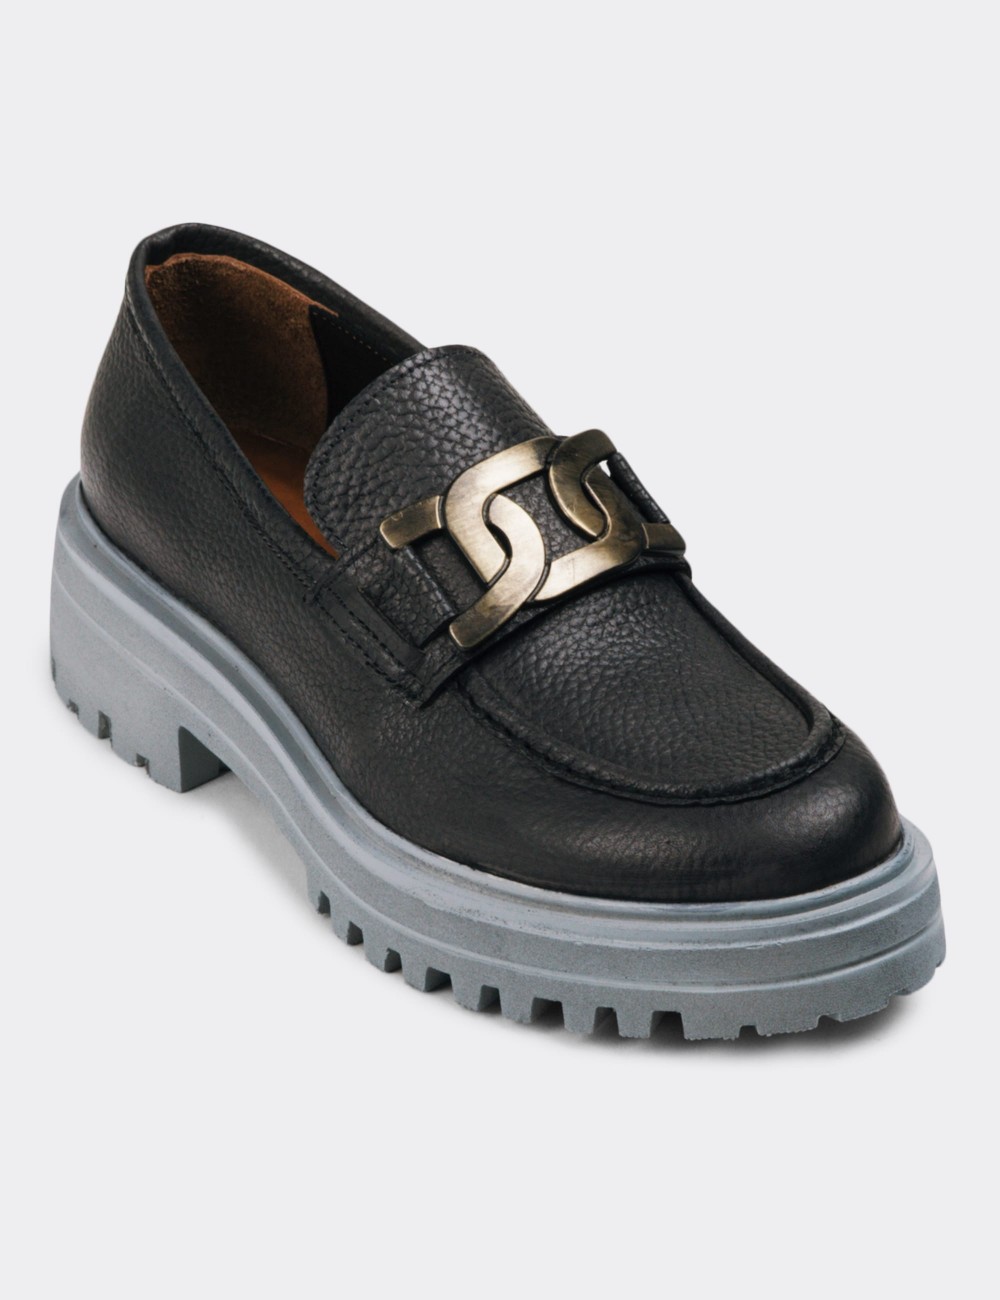 Gray Leather Loafers - 01902ZGRIP02